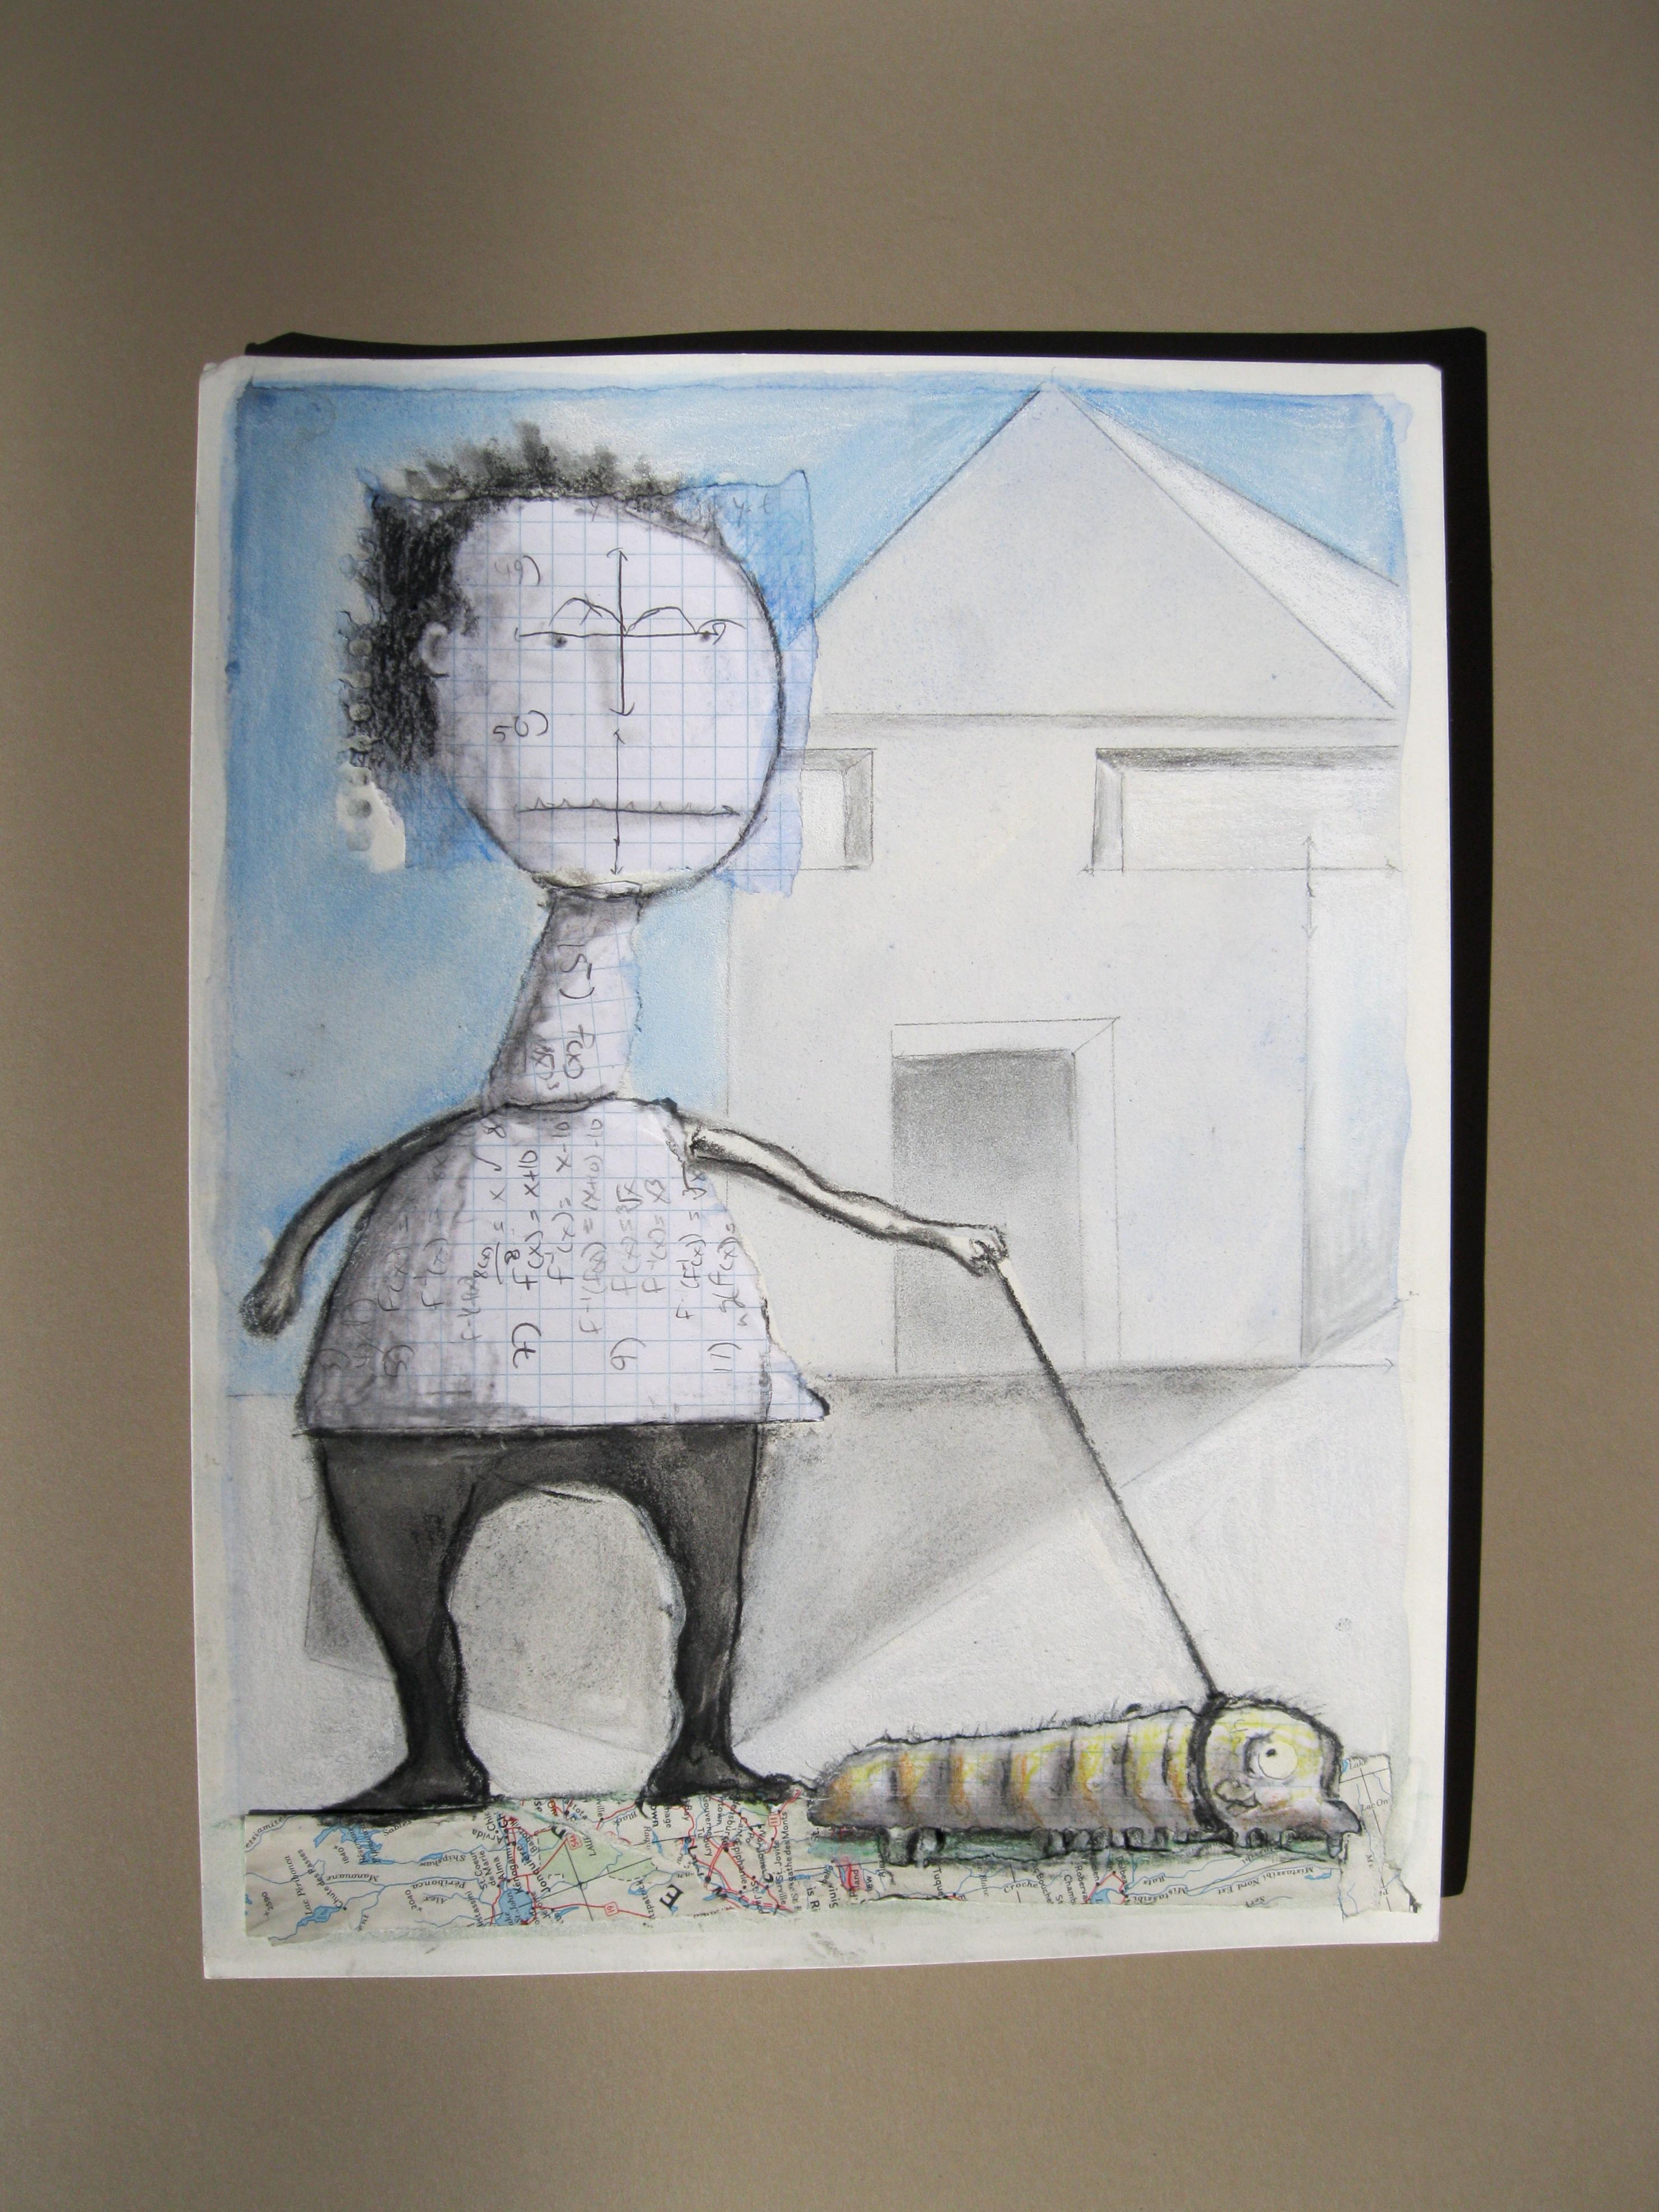 Walking the Inch - Outsider Art Mixed Media Art by Libby Ramage